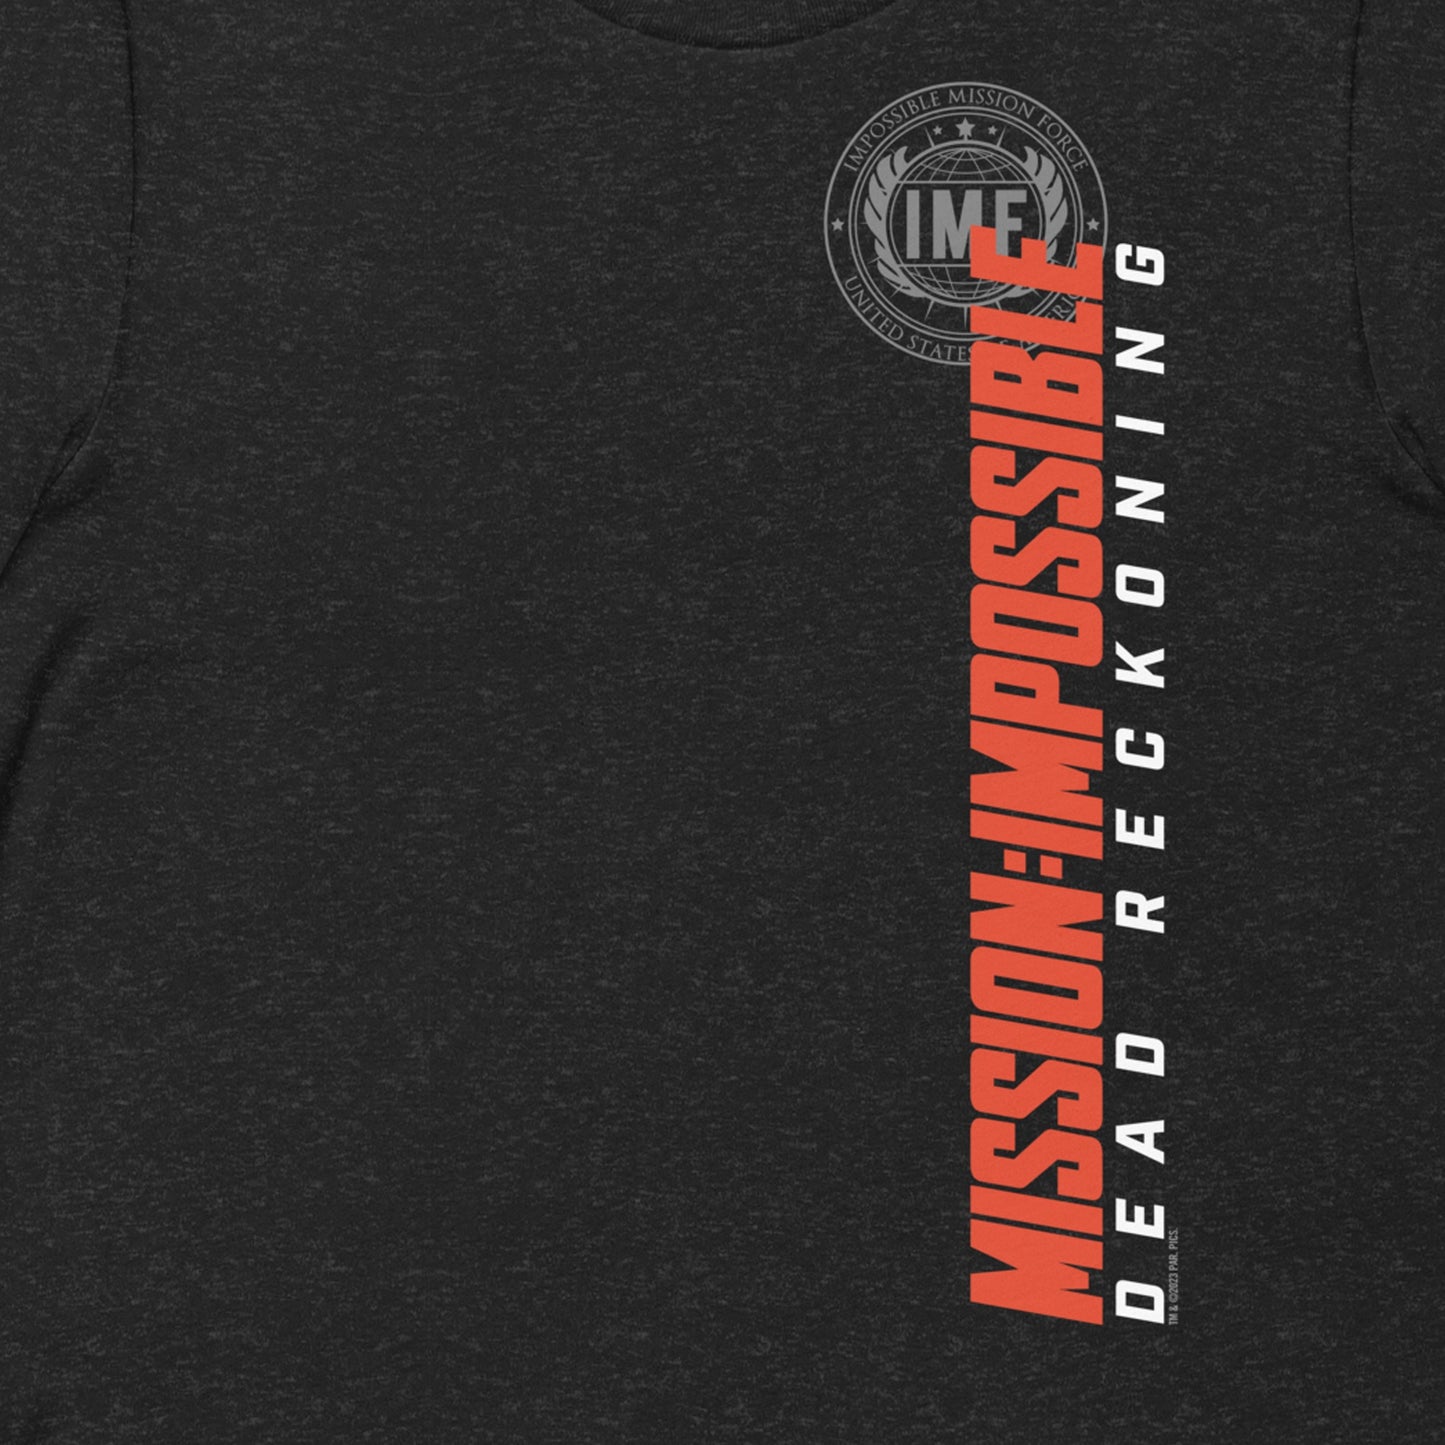 Mission: Impossible - Dead Reckoning Logo T-Shirt